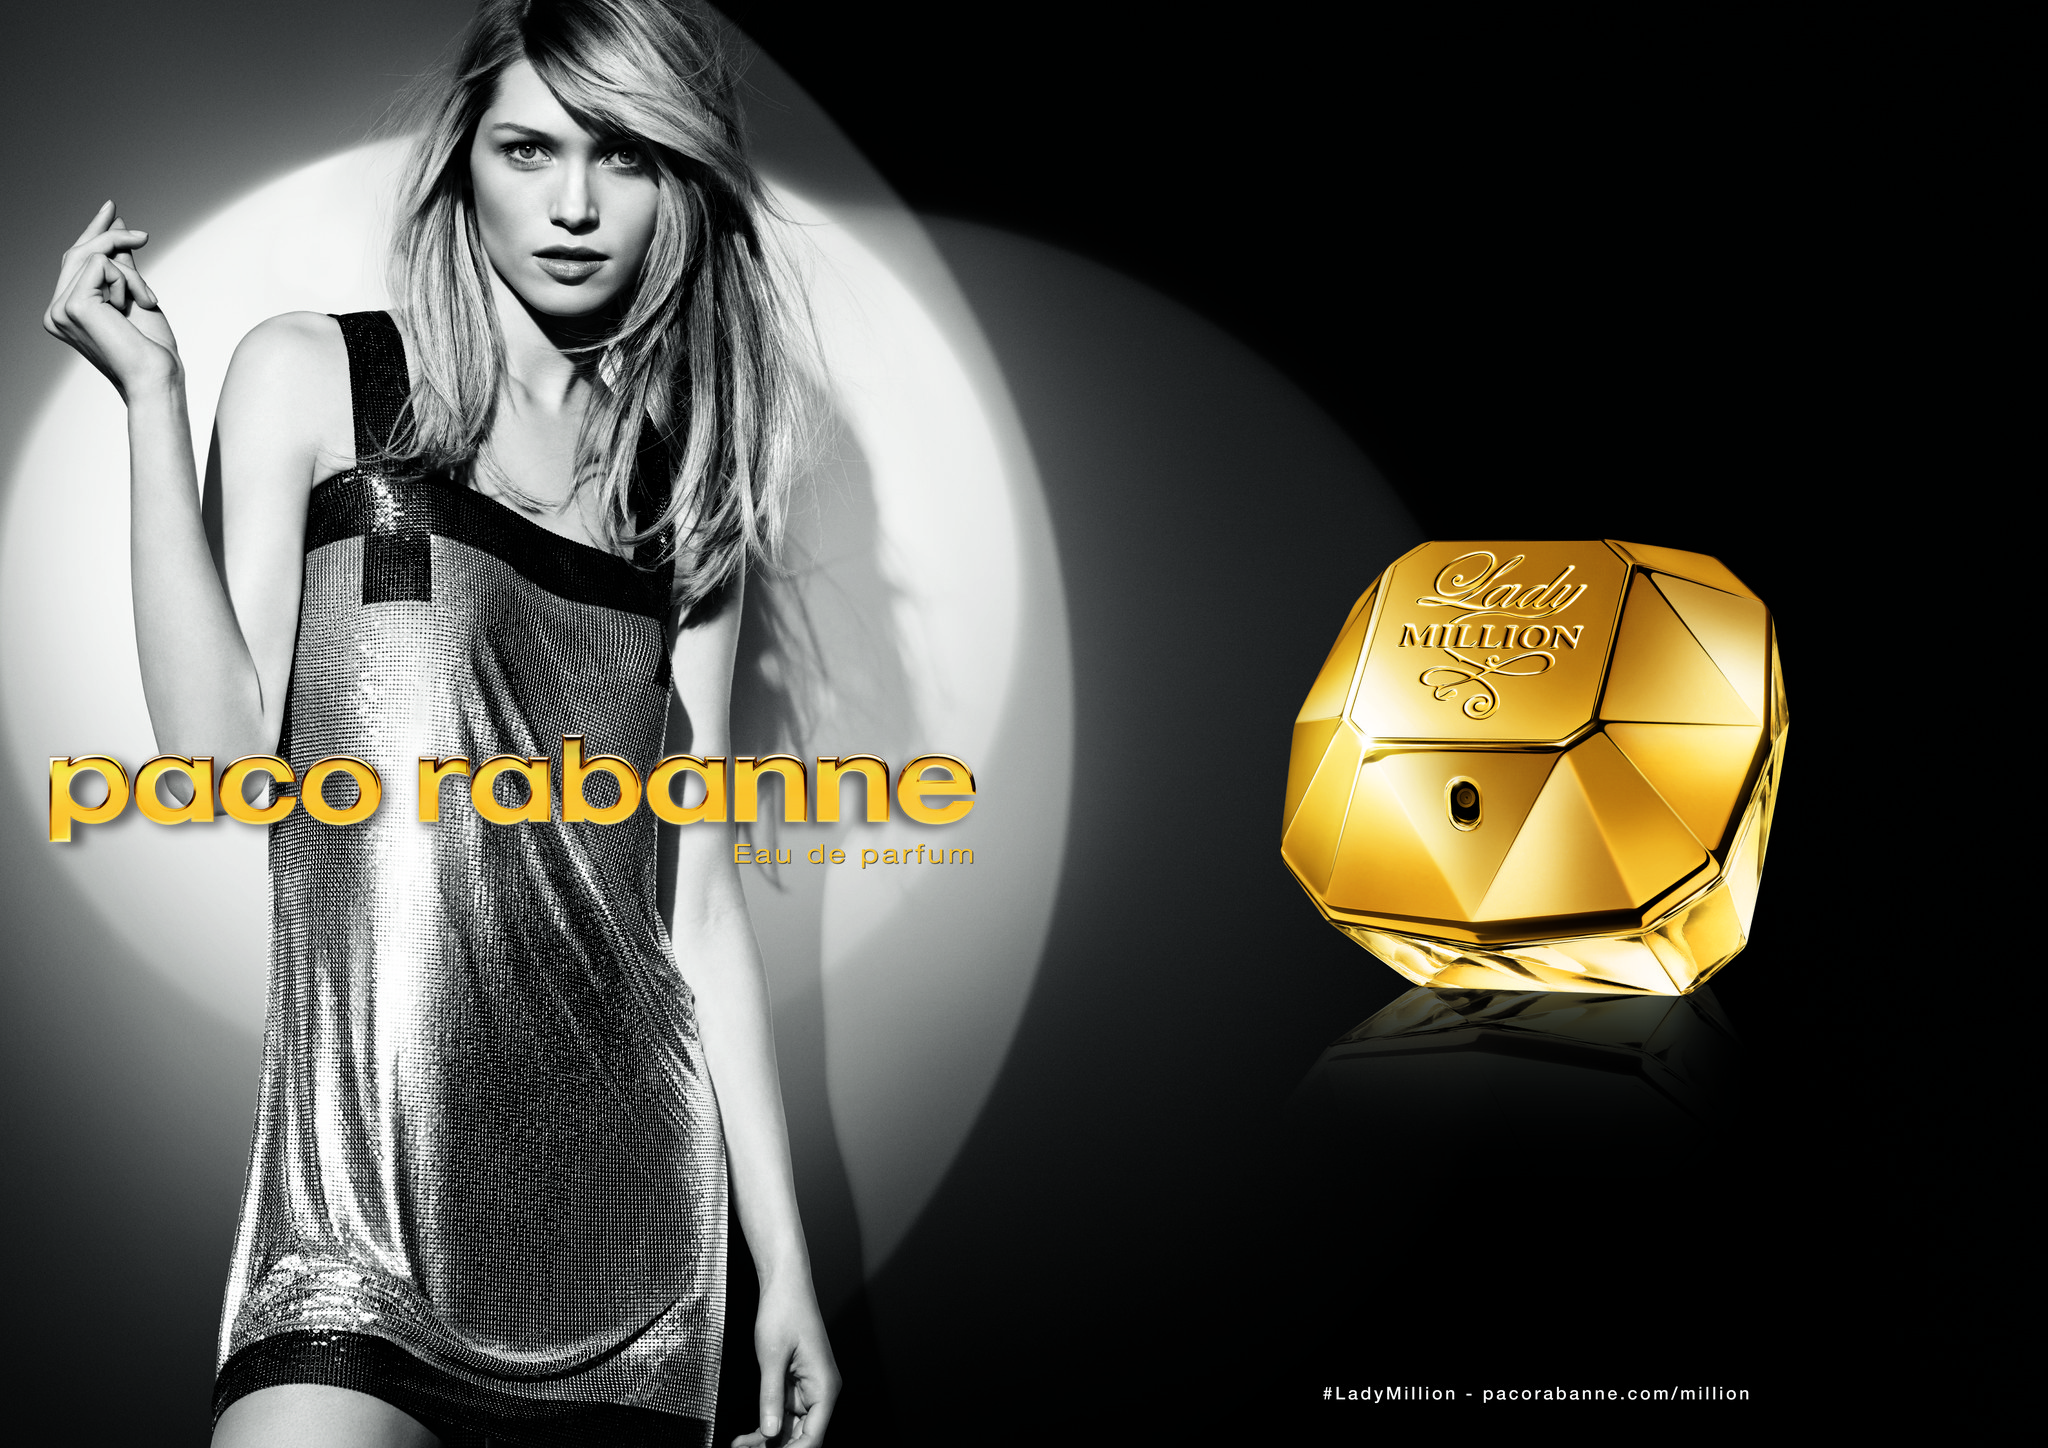 PACO RABANNE_LADY MILLION NEW COMMERCIAL_PRINT ADVERTISING_DP_CMYK.tif